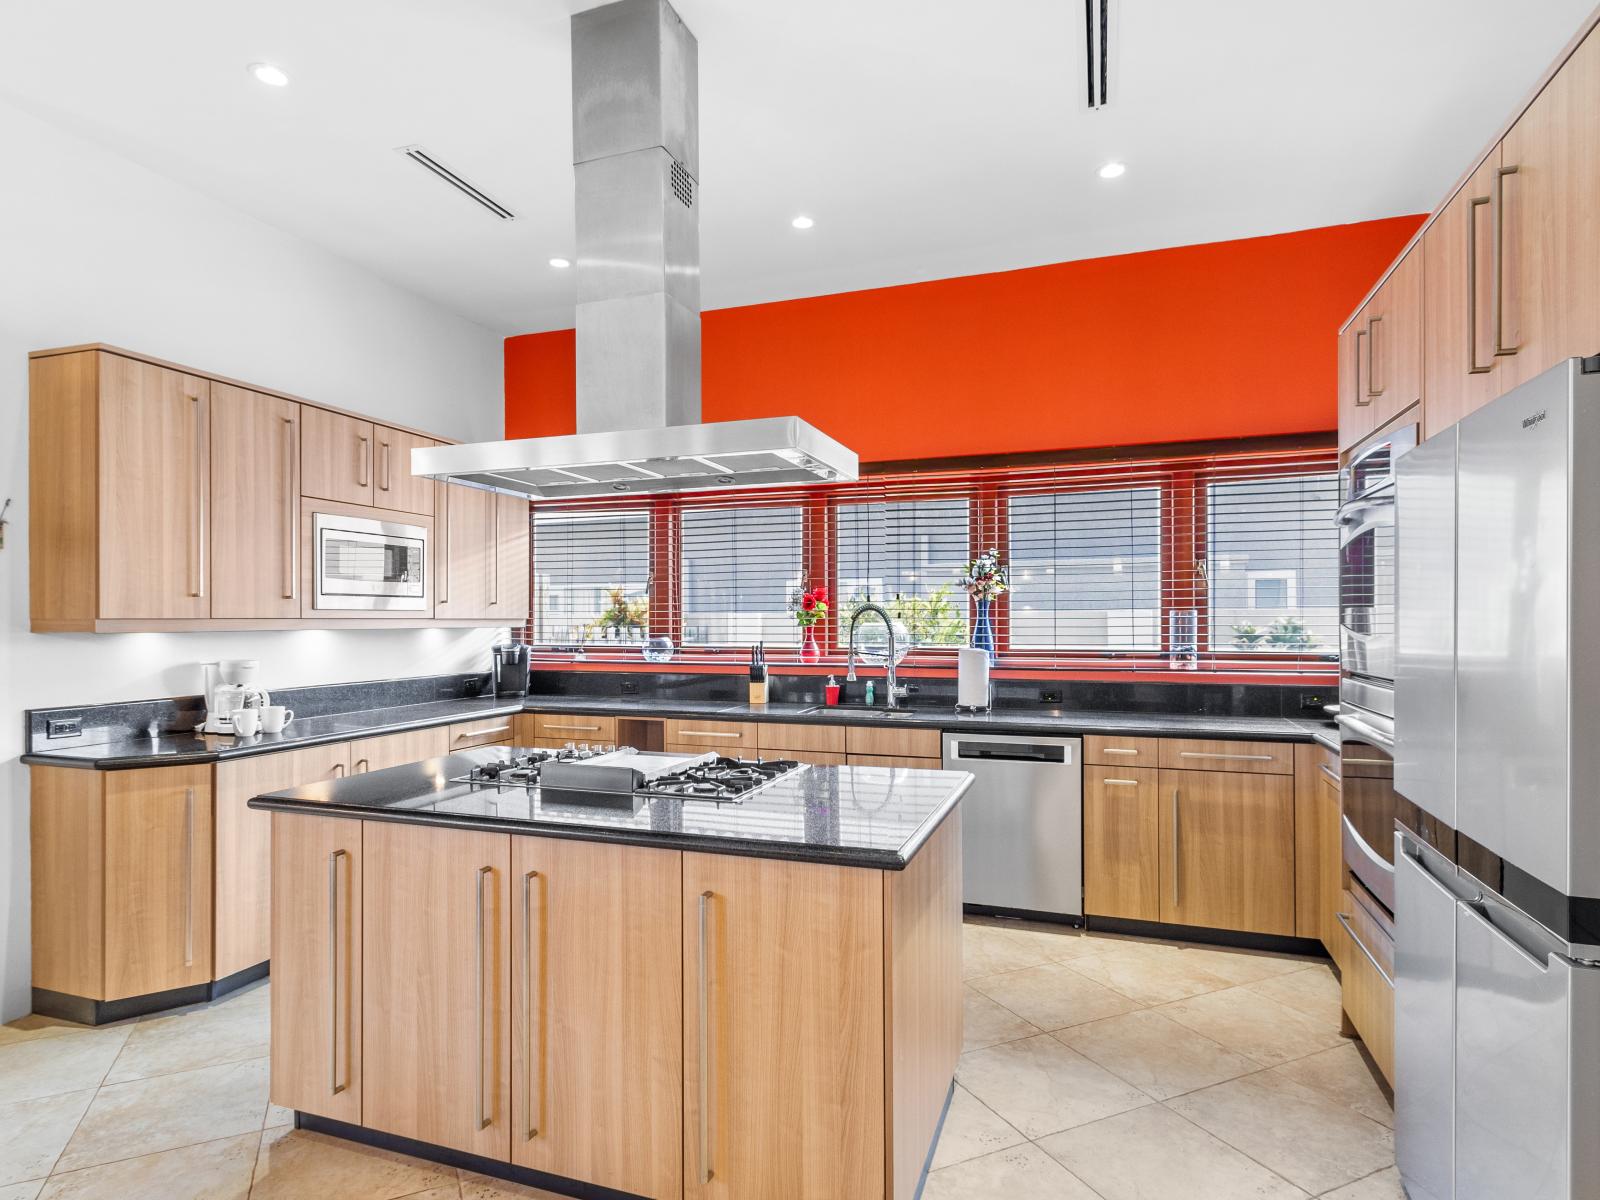 Vibrant pops of color are peppered throughout the kitchen